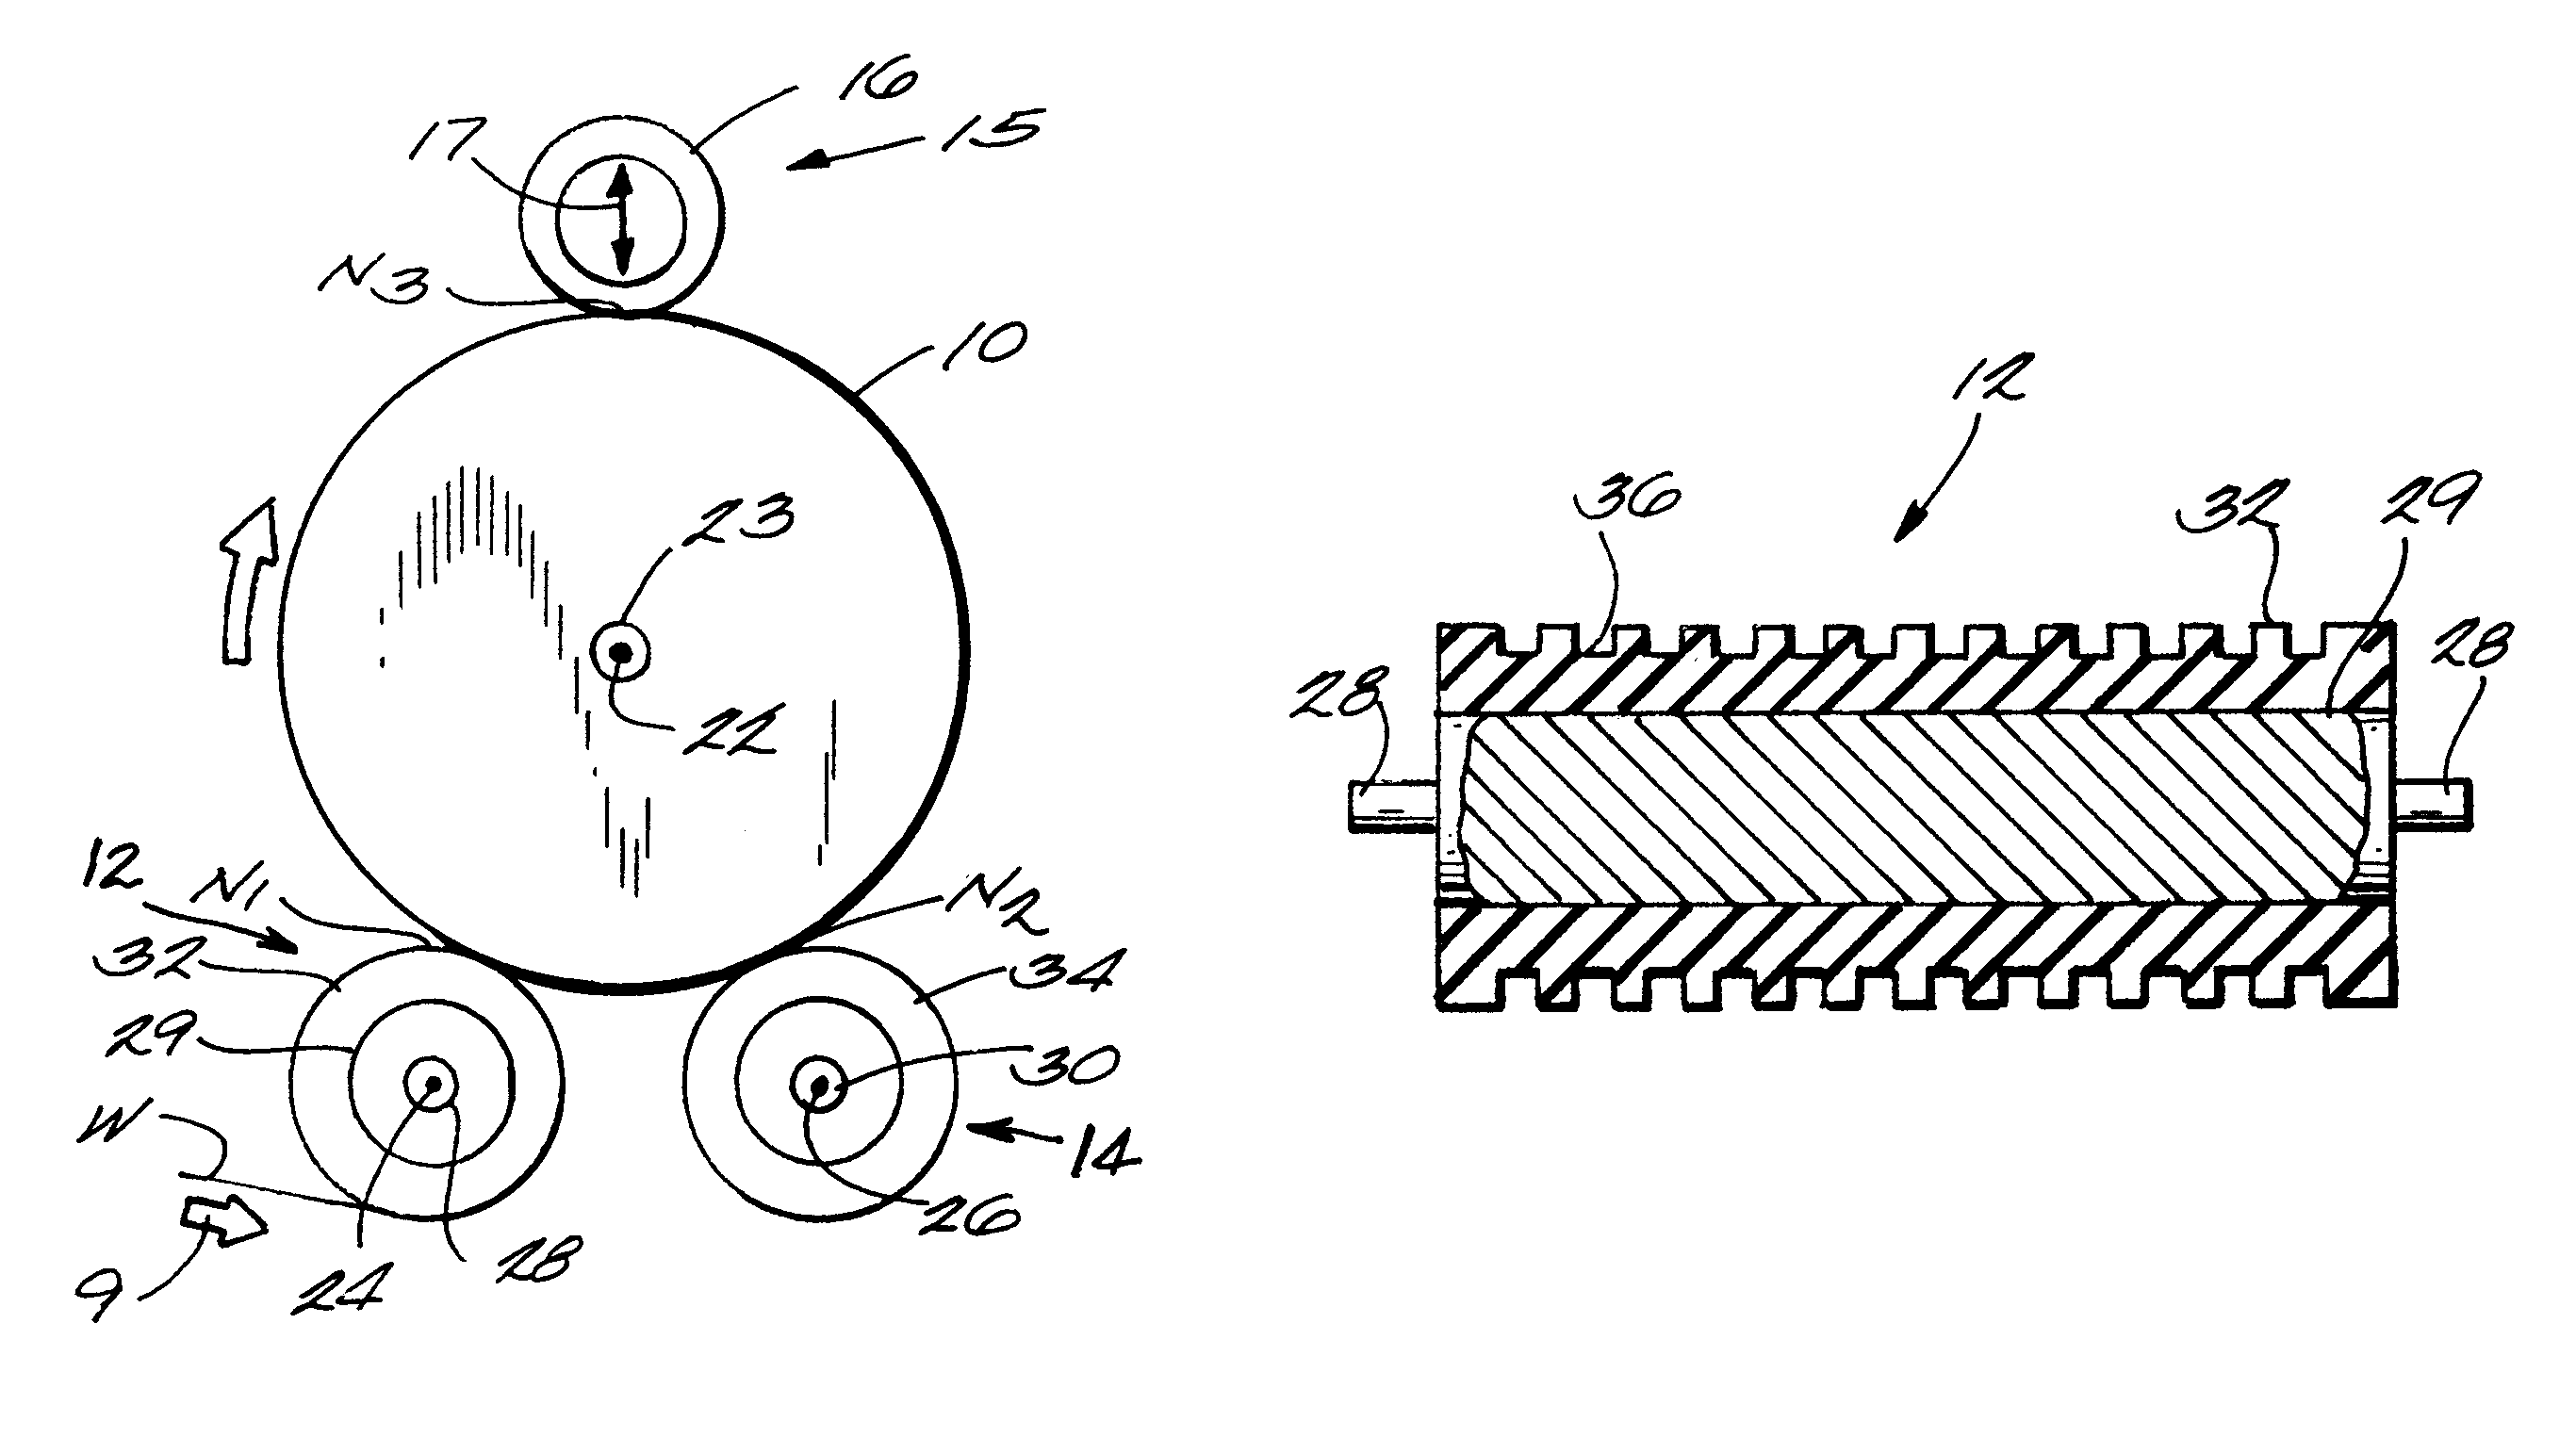 Support or pressure roll for a paper roll winder